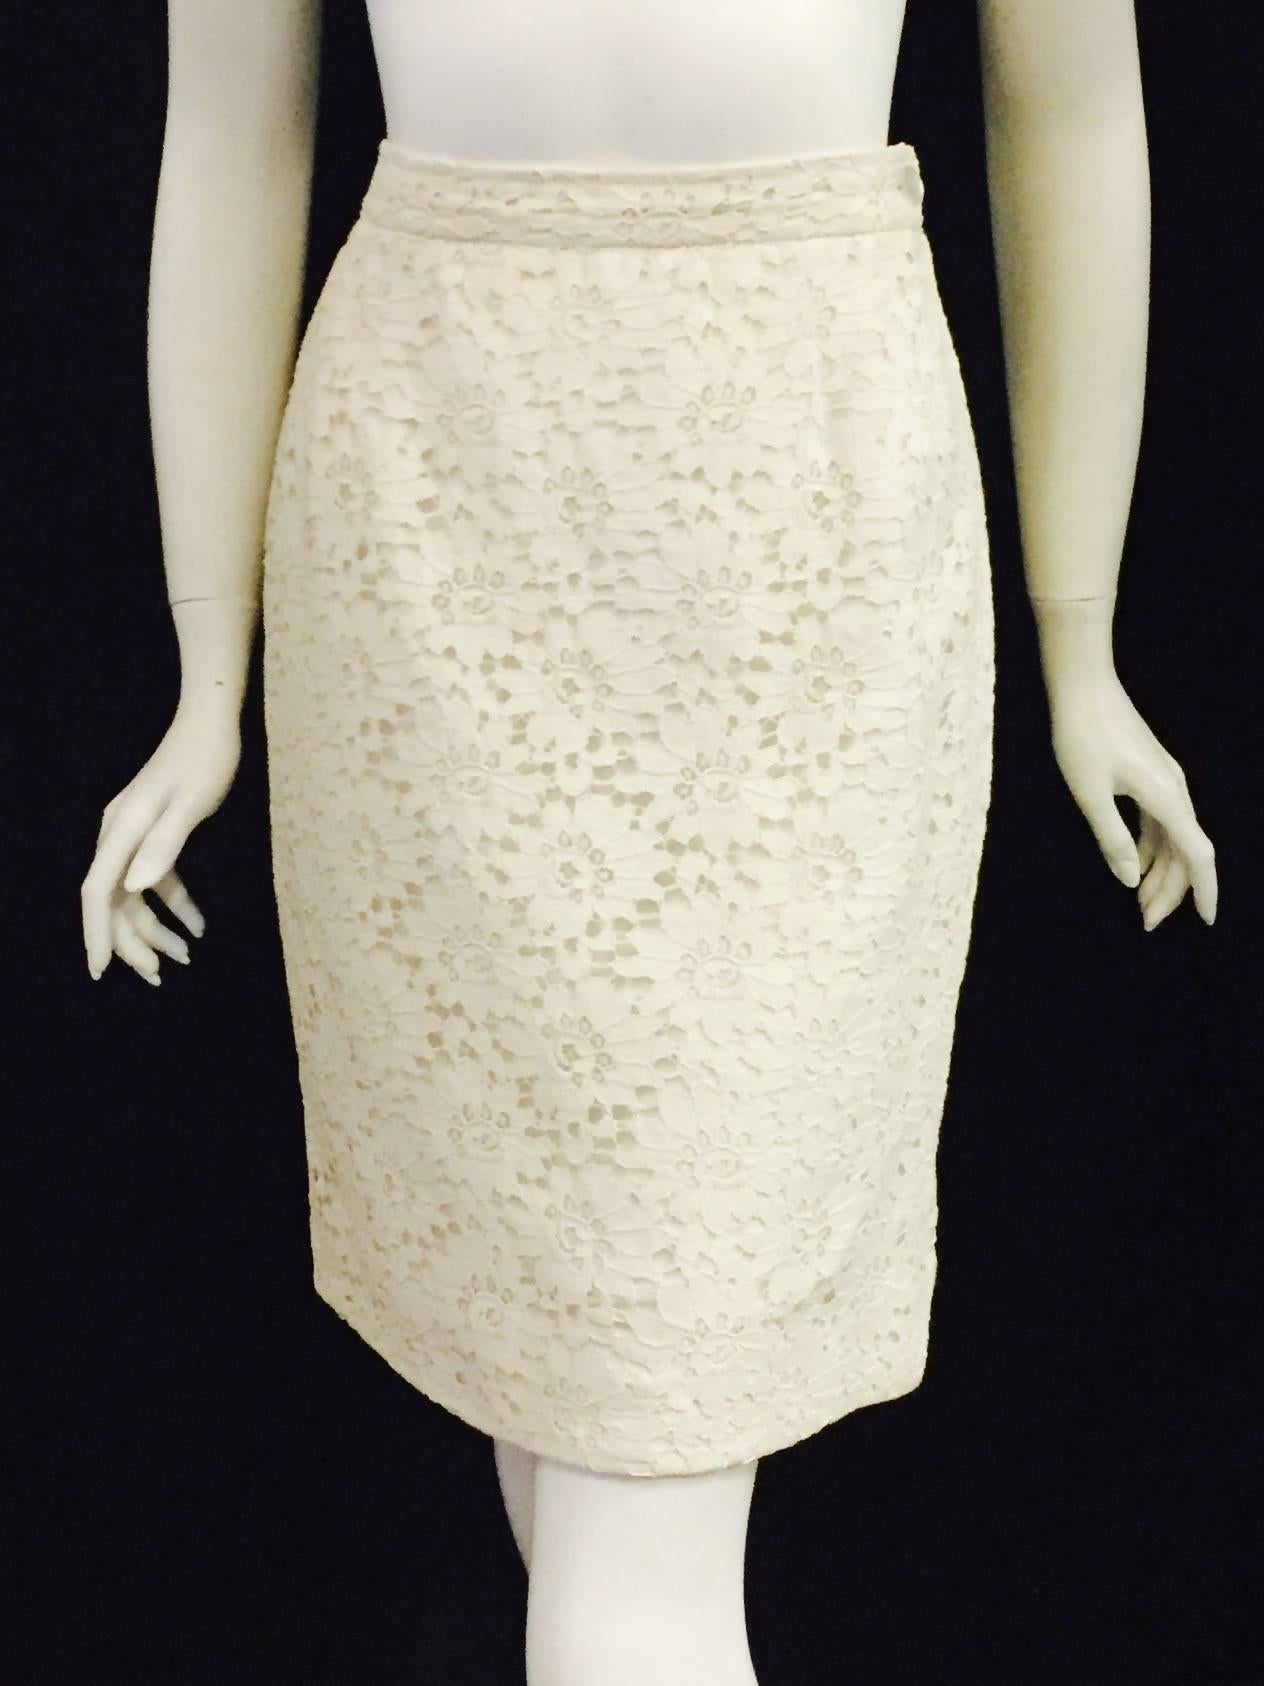 Emanuel Ungaro's Ivory lace skirt features classic pencil silhouette and knee length. The incredible flower pattern lace is reminiscent of 70's wedding dresses.   An awesome lace flower design skirt that can be dressed up with a sequined top or more